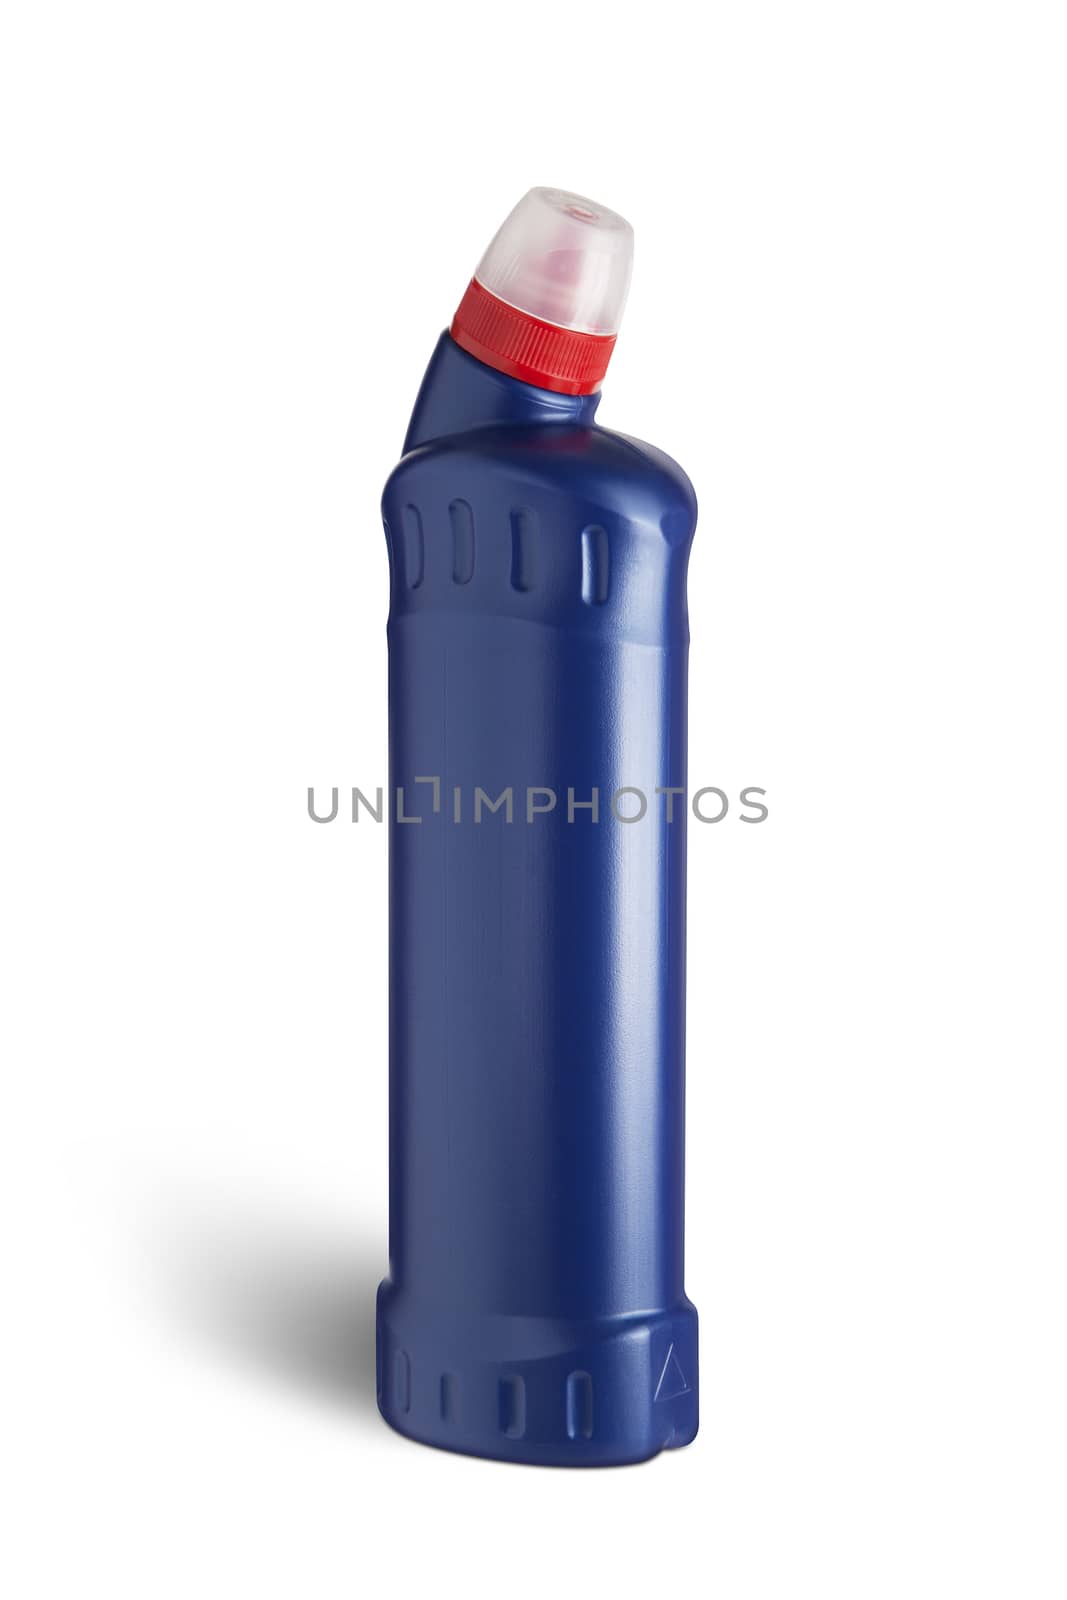 Blue plastic bottle for liquid laundry detergent, cleaning agent, bleach or fabric softener. With clipping path
